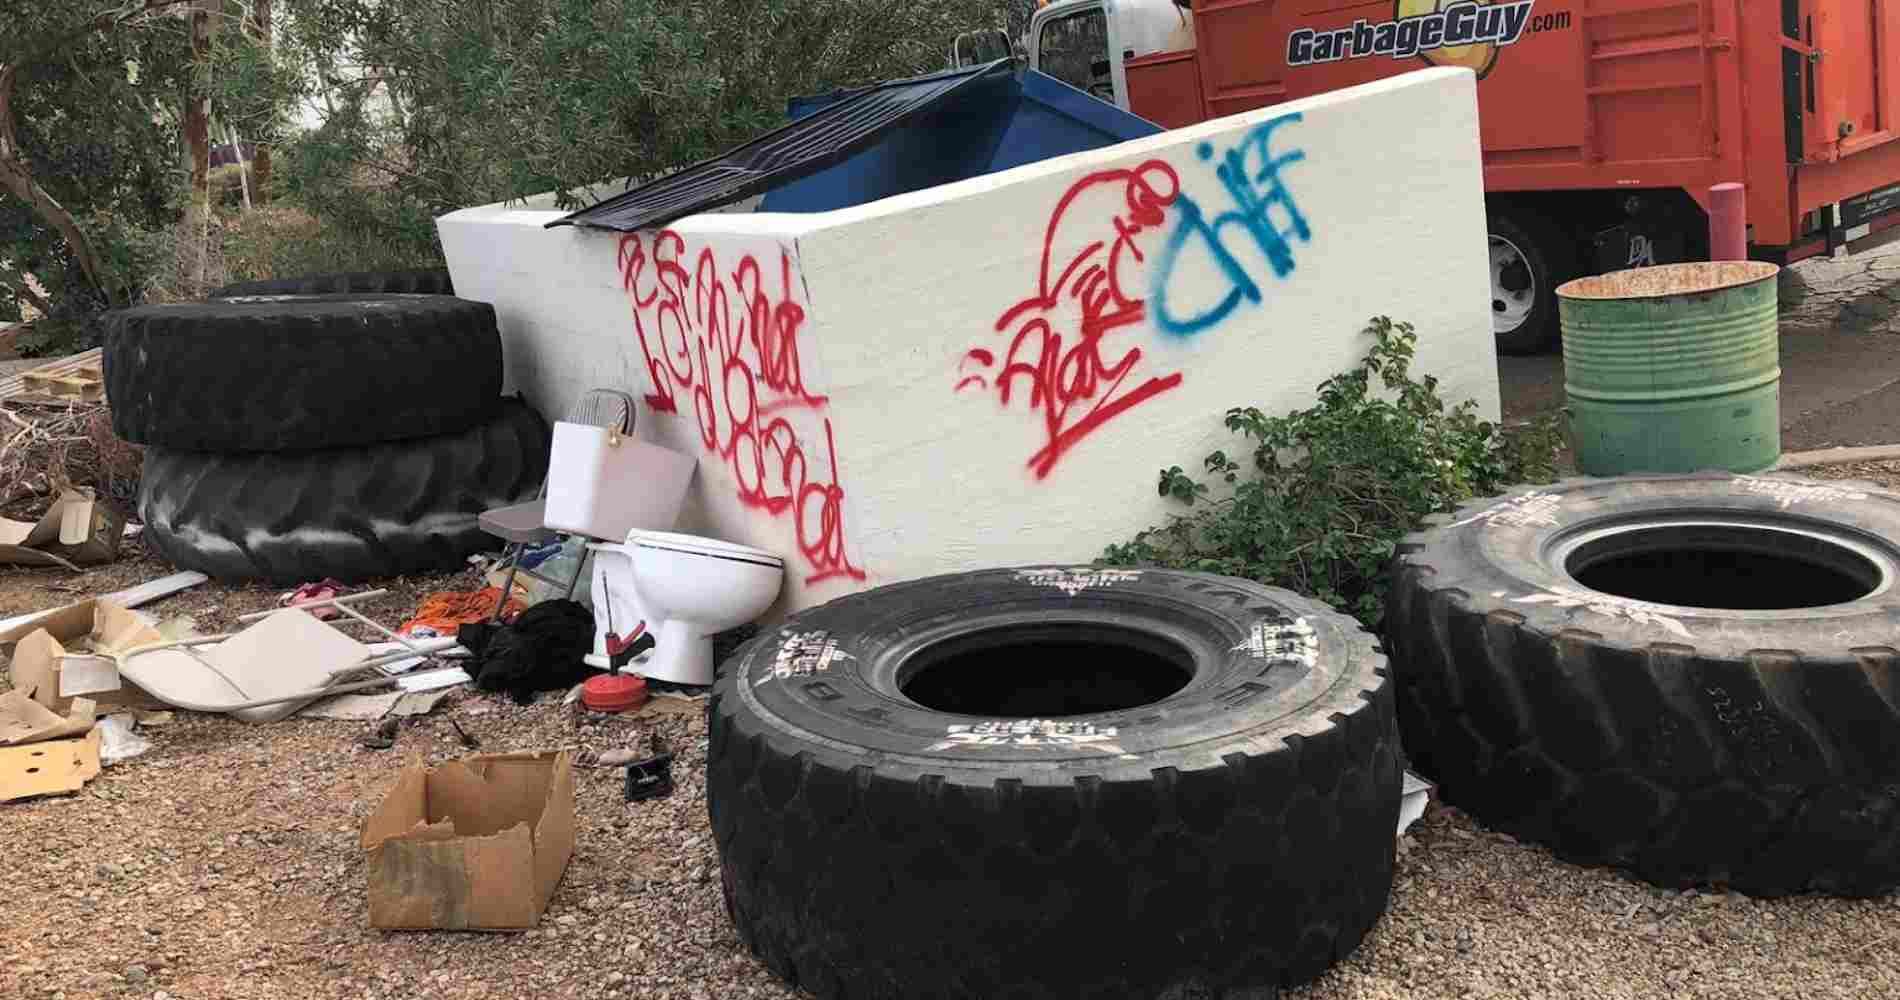 #1 for Tire Disposal in Goodyear, AZ with Over 1200 5-Star Reviews!